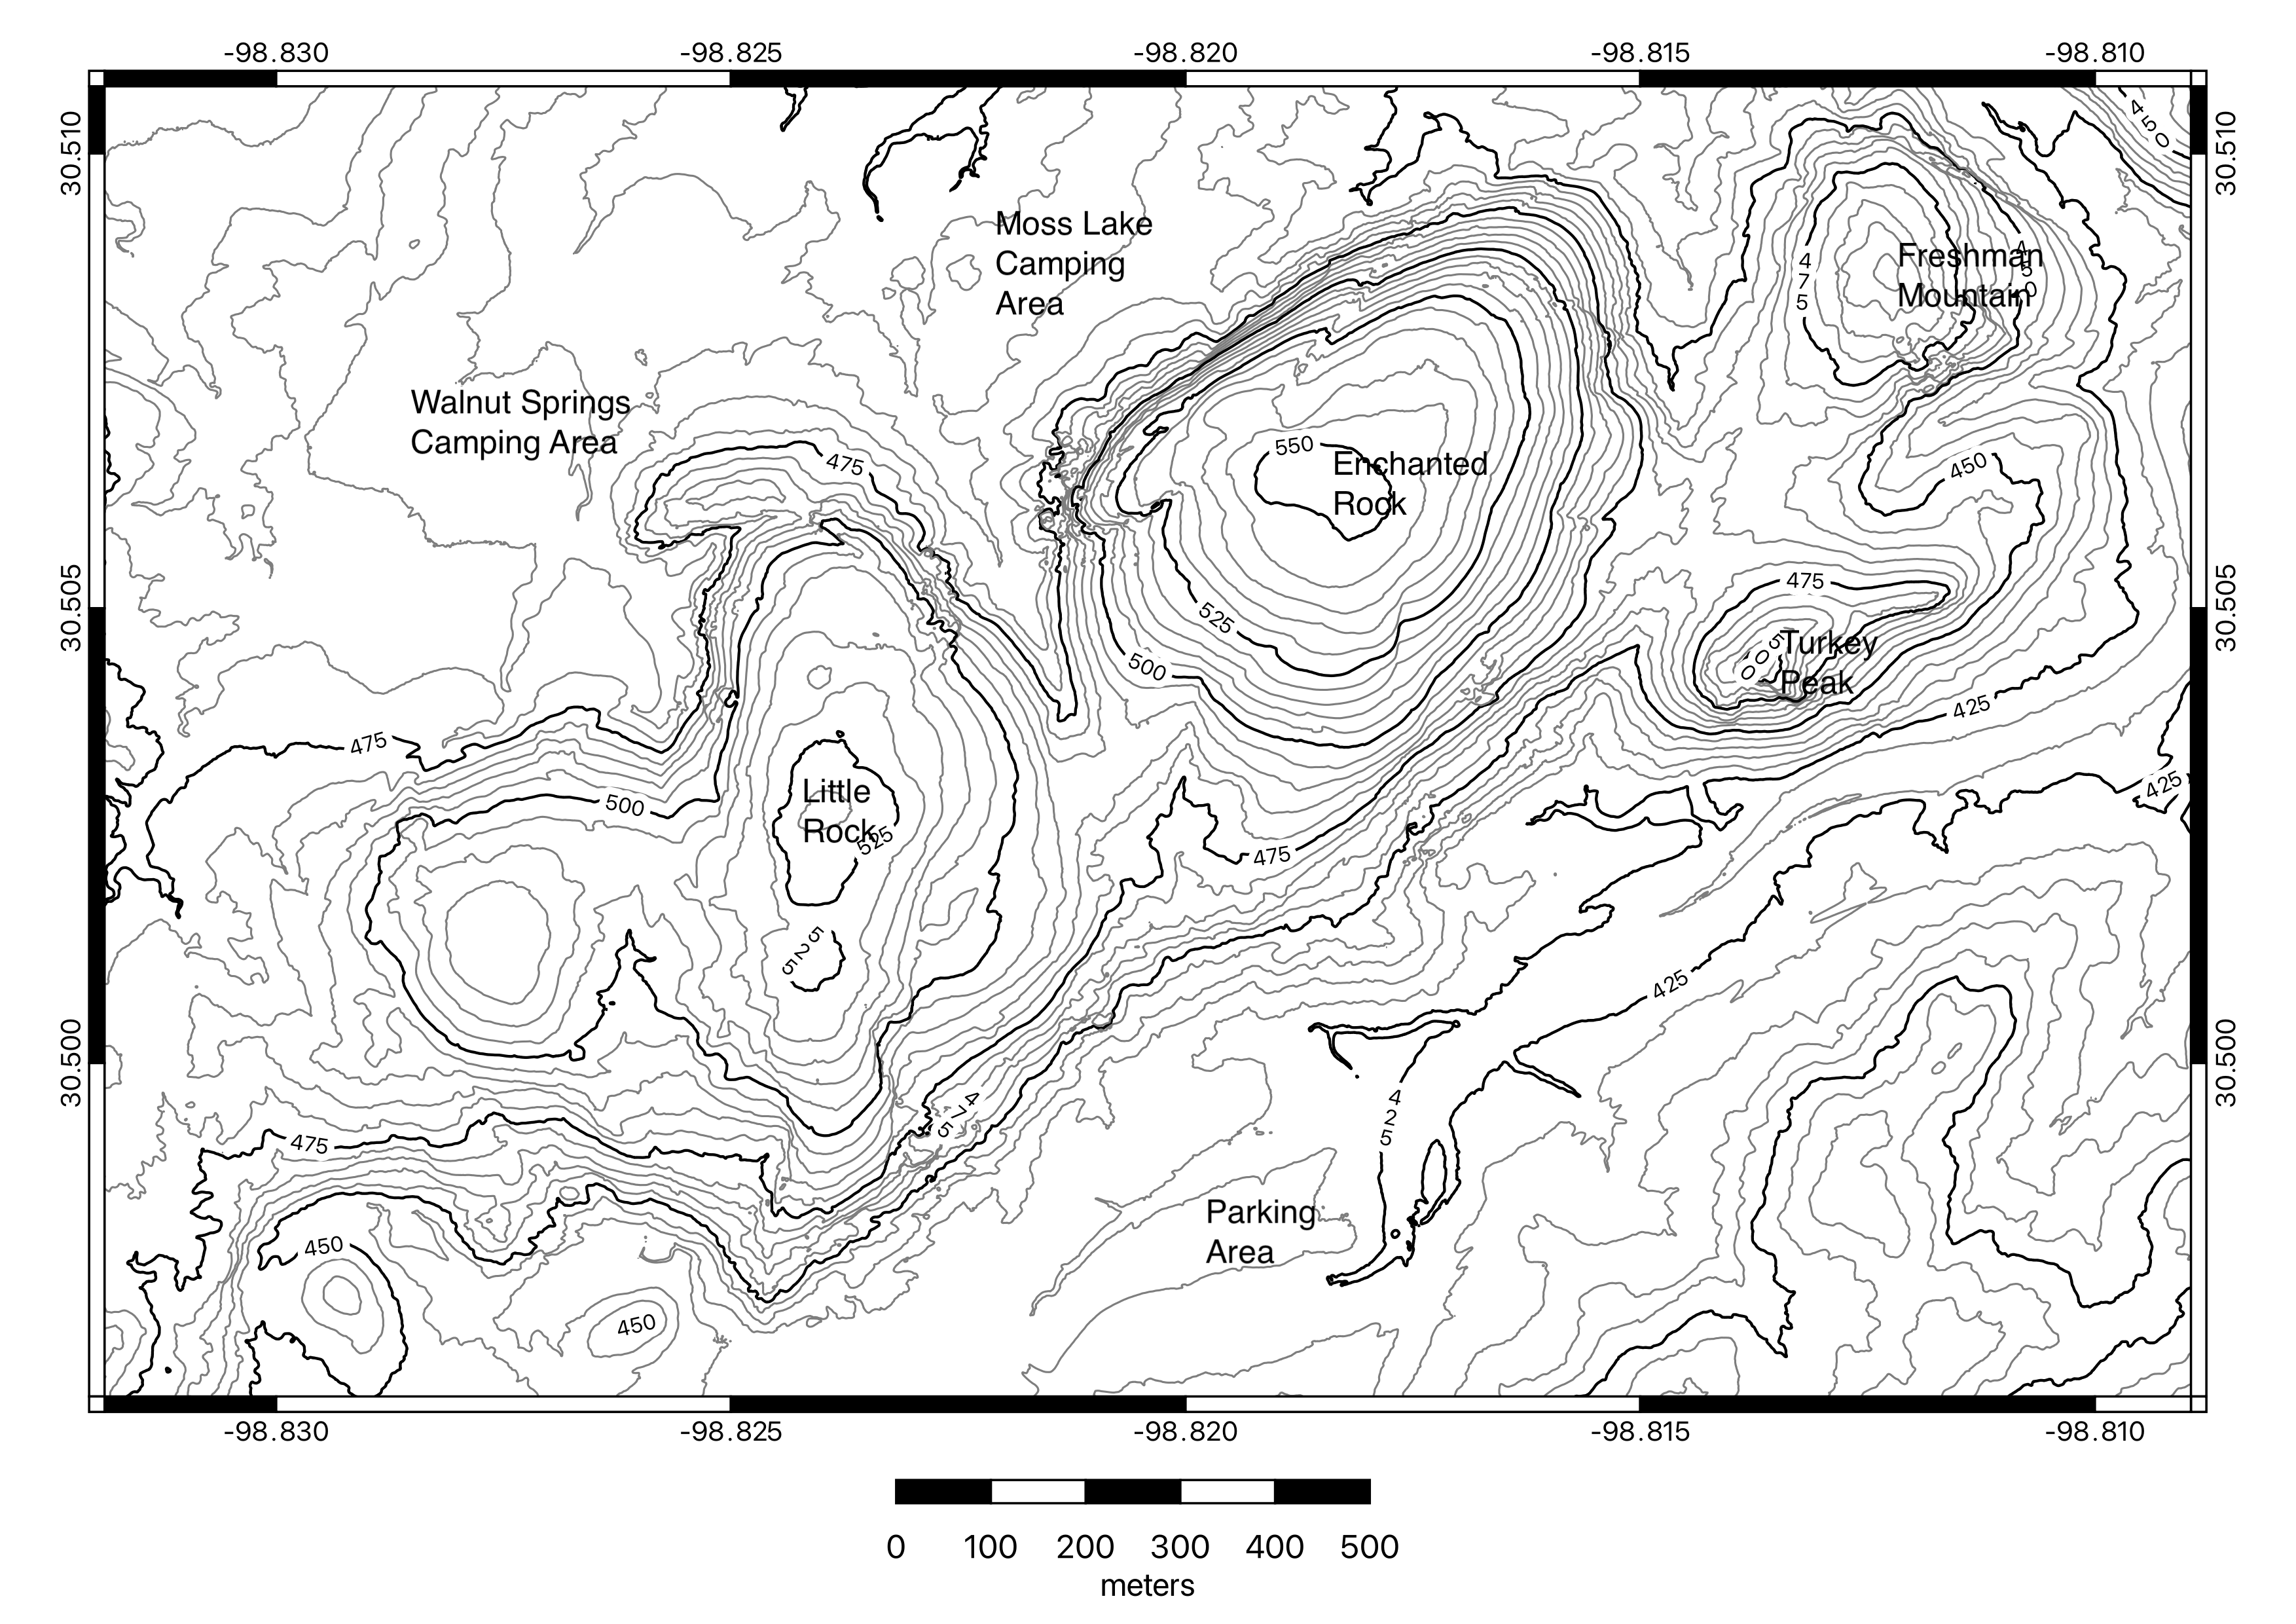 Contour map of Enchanted Rock State Natural Area, TX